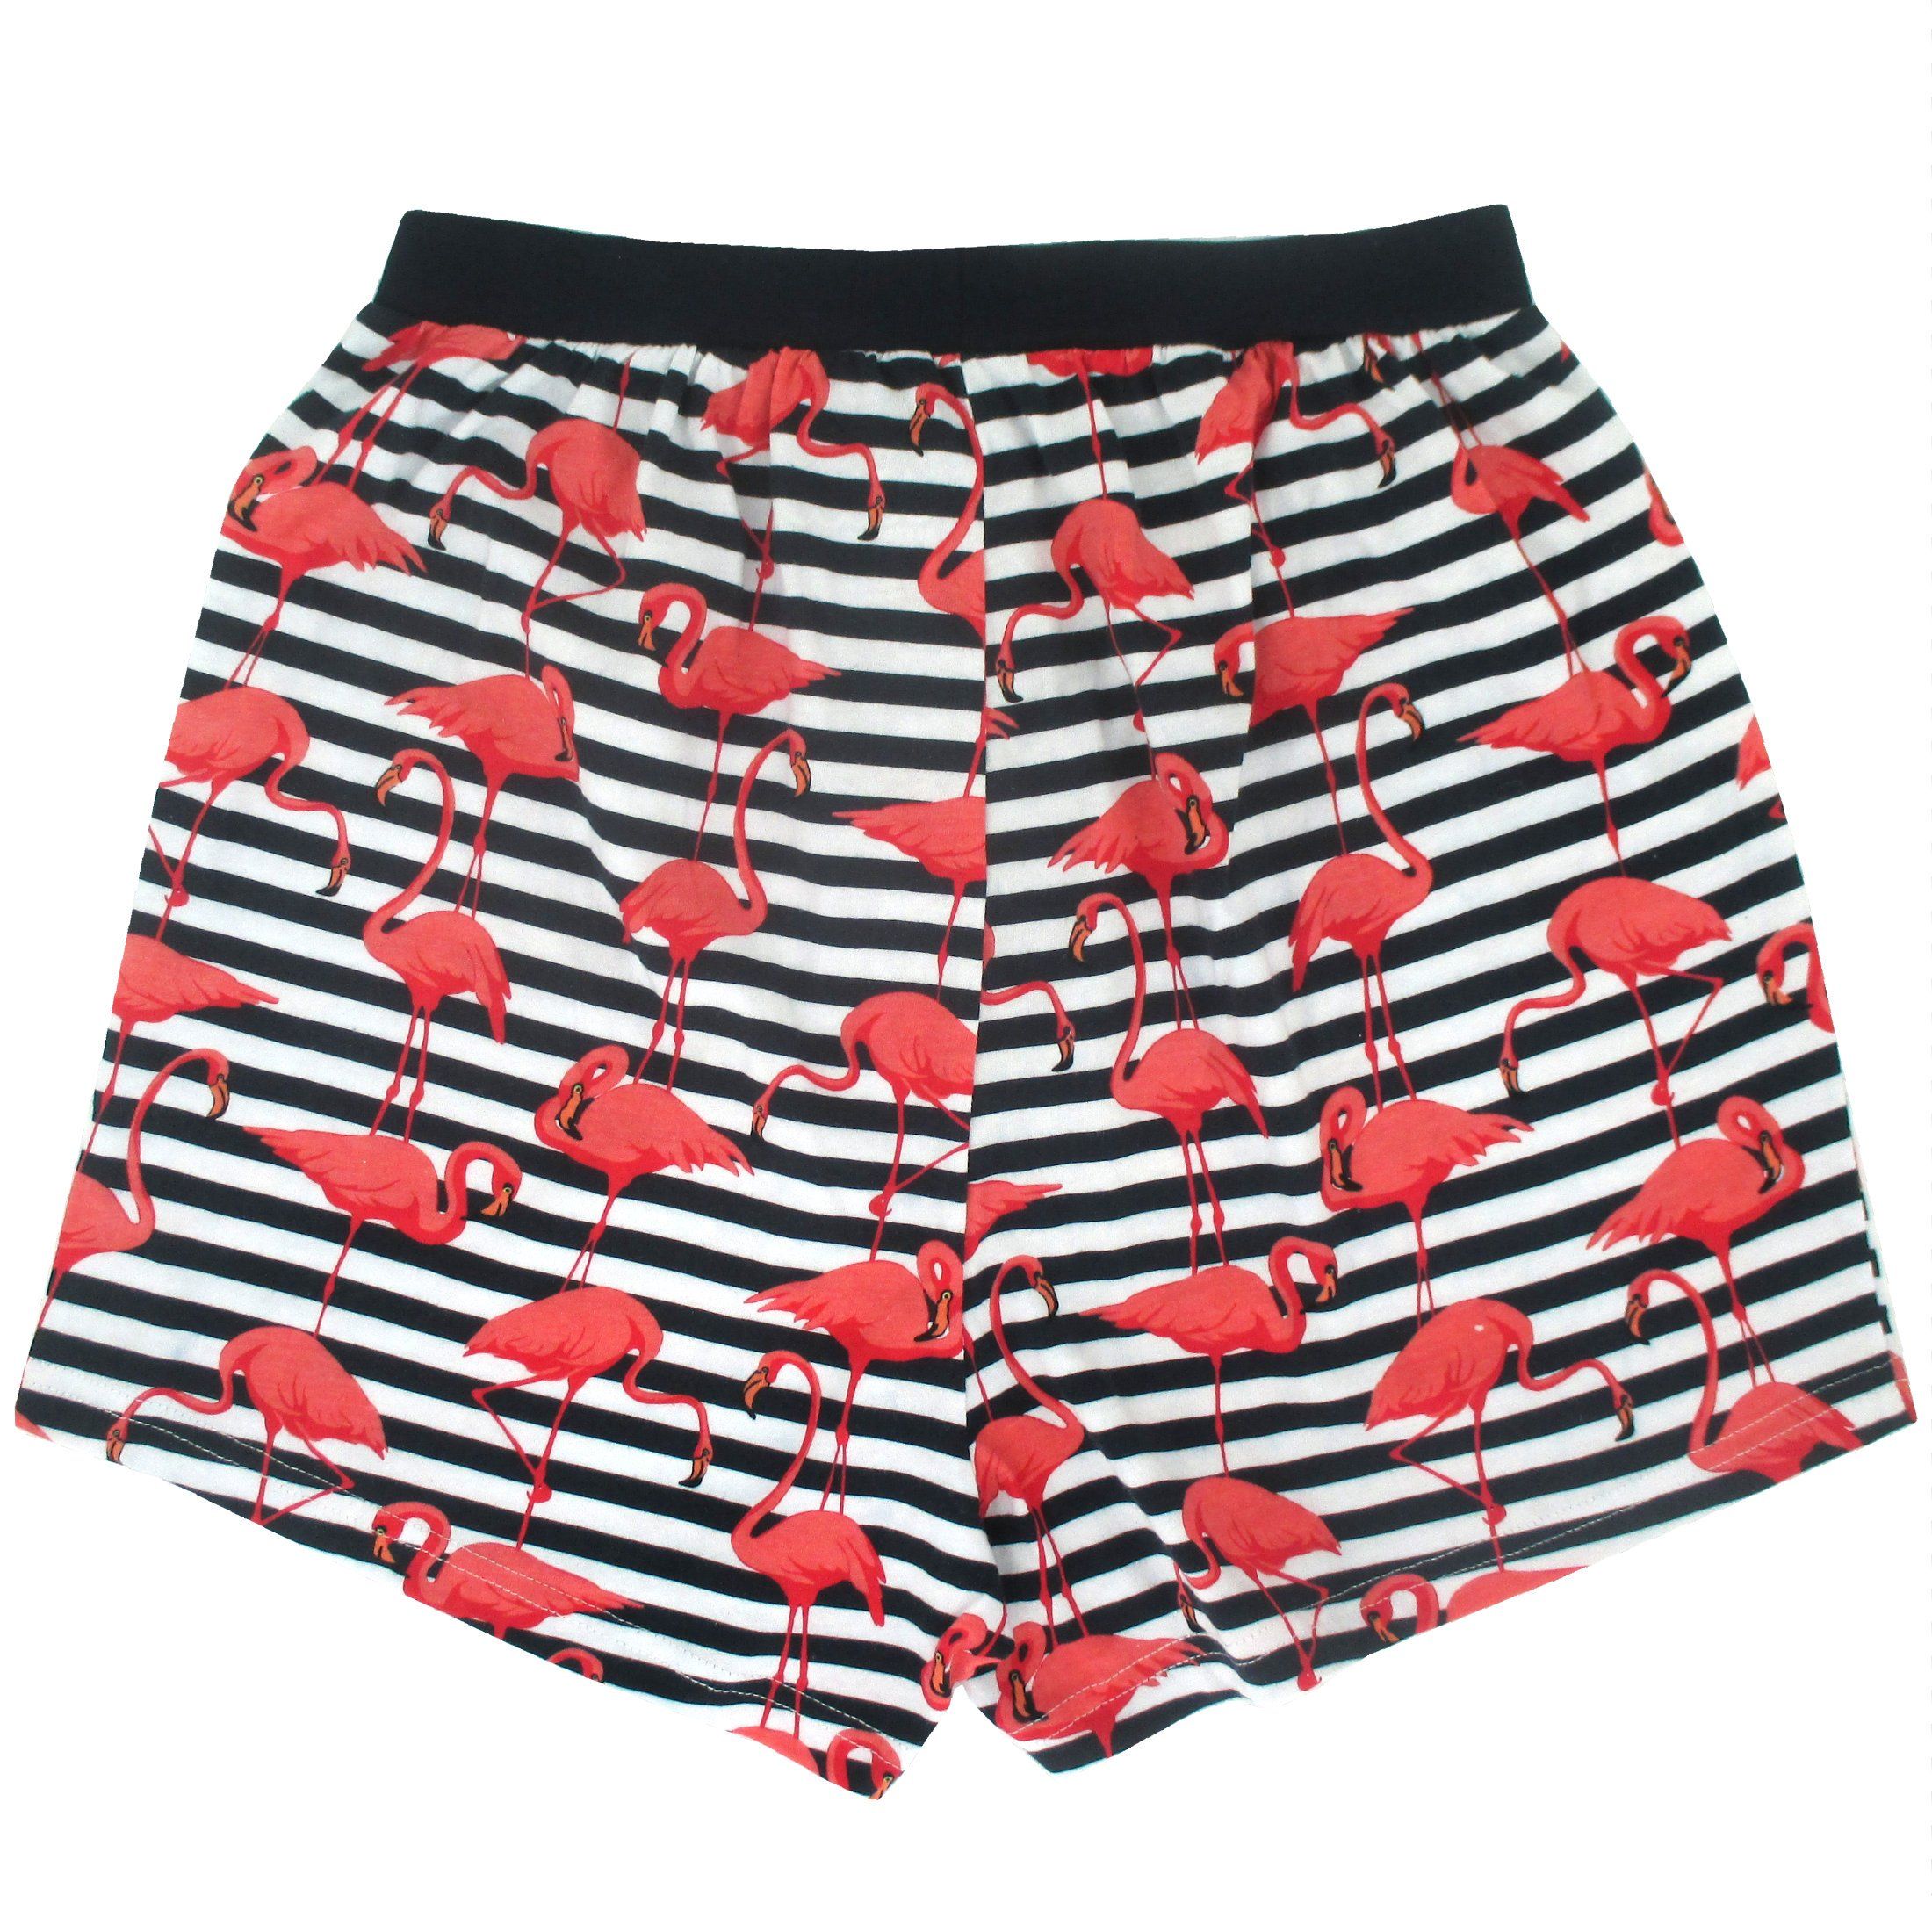 Men's Pink Flamingo All Over Print Striped Cotton Knit Boxer Shorts